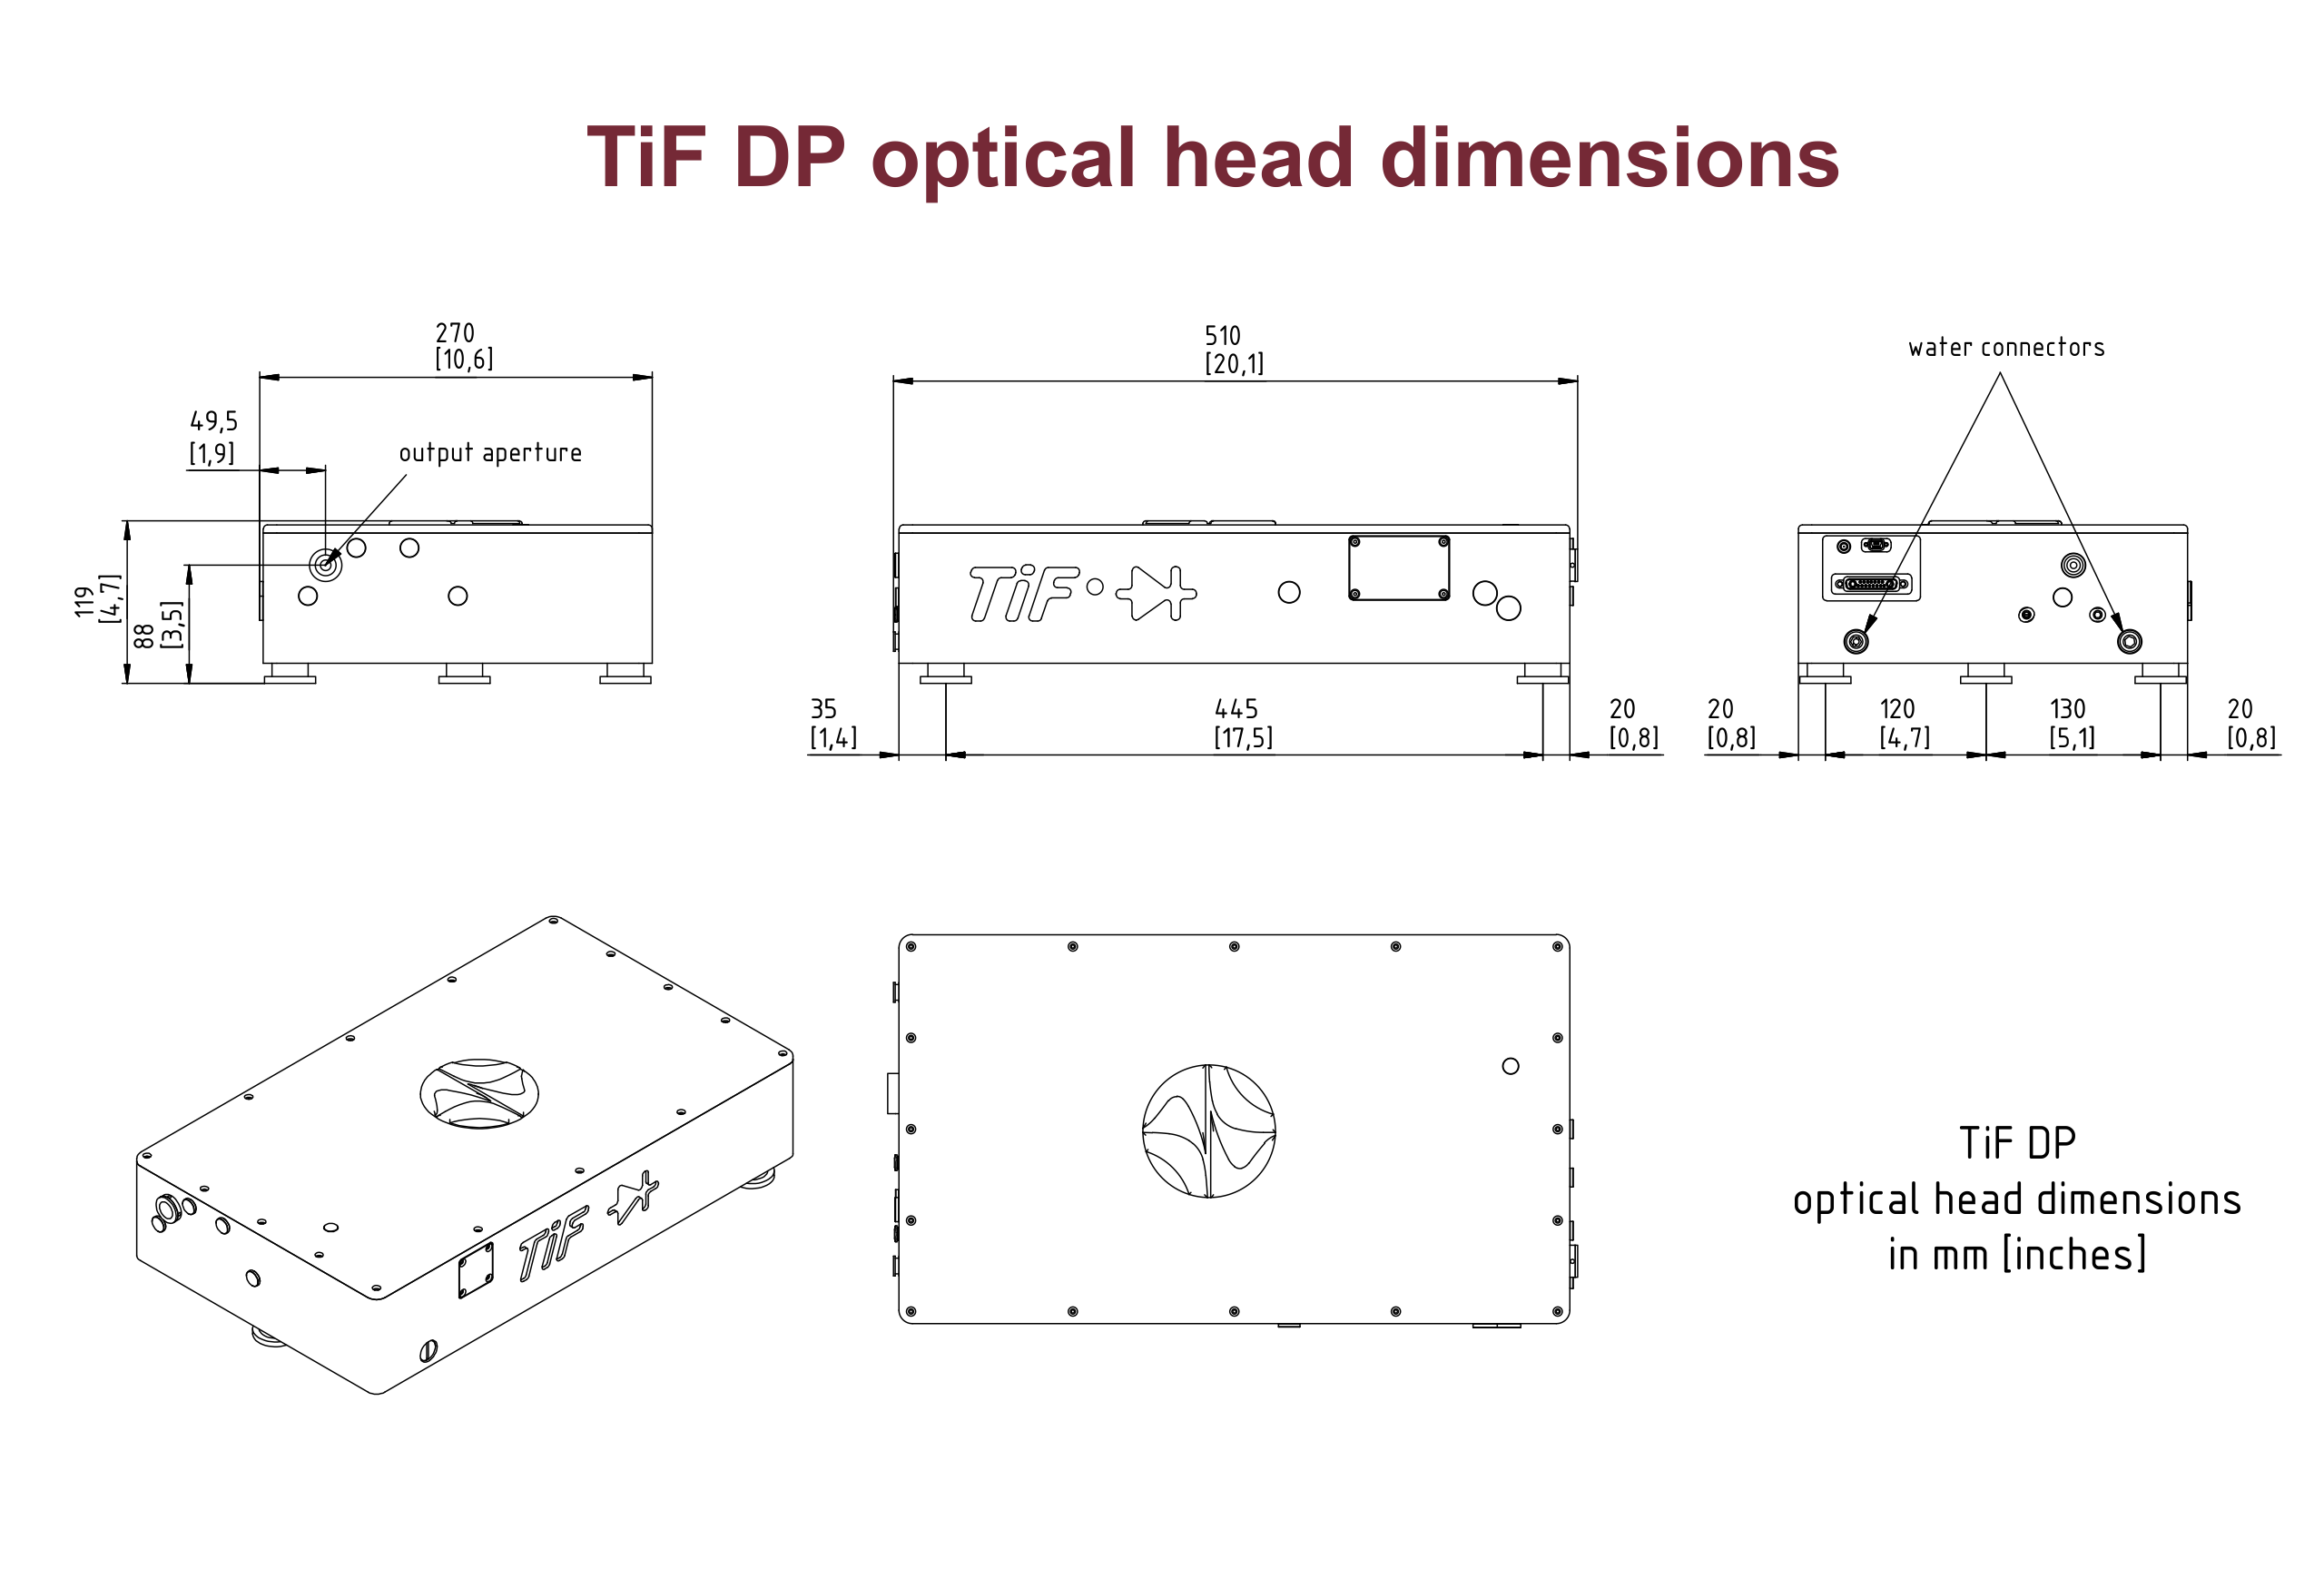 Dimensions of the TiF-DP laser head including the pump module